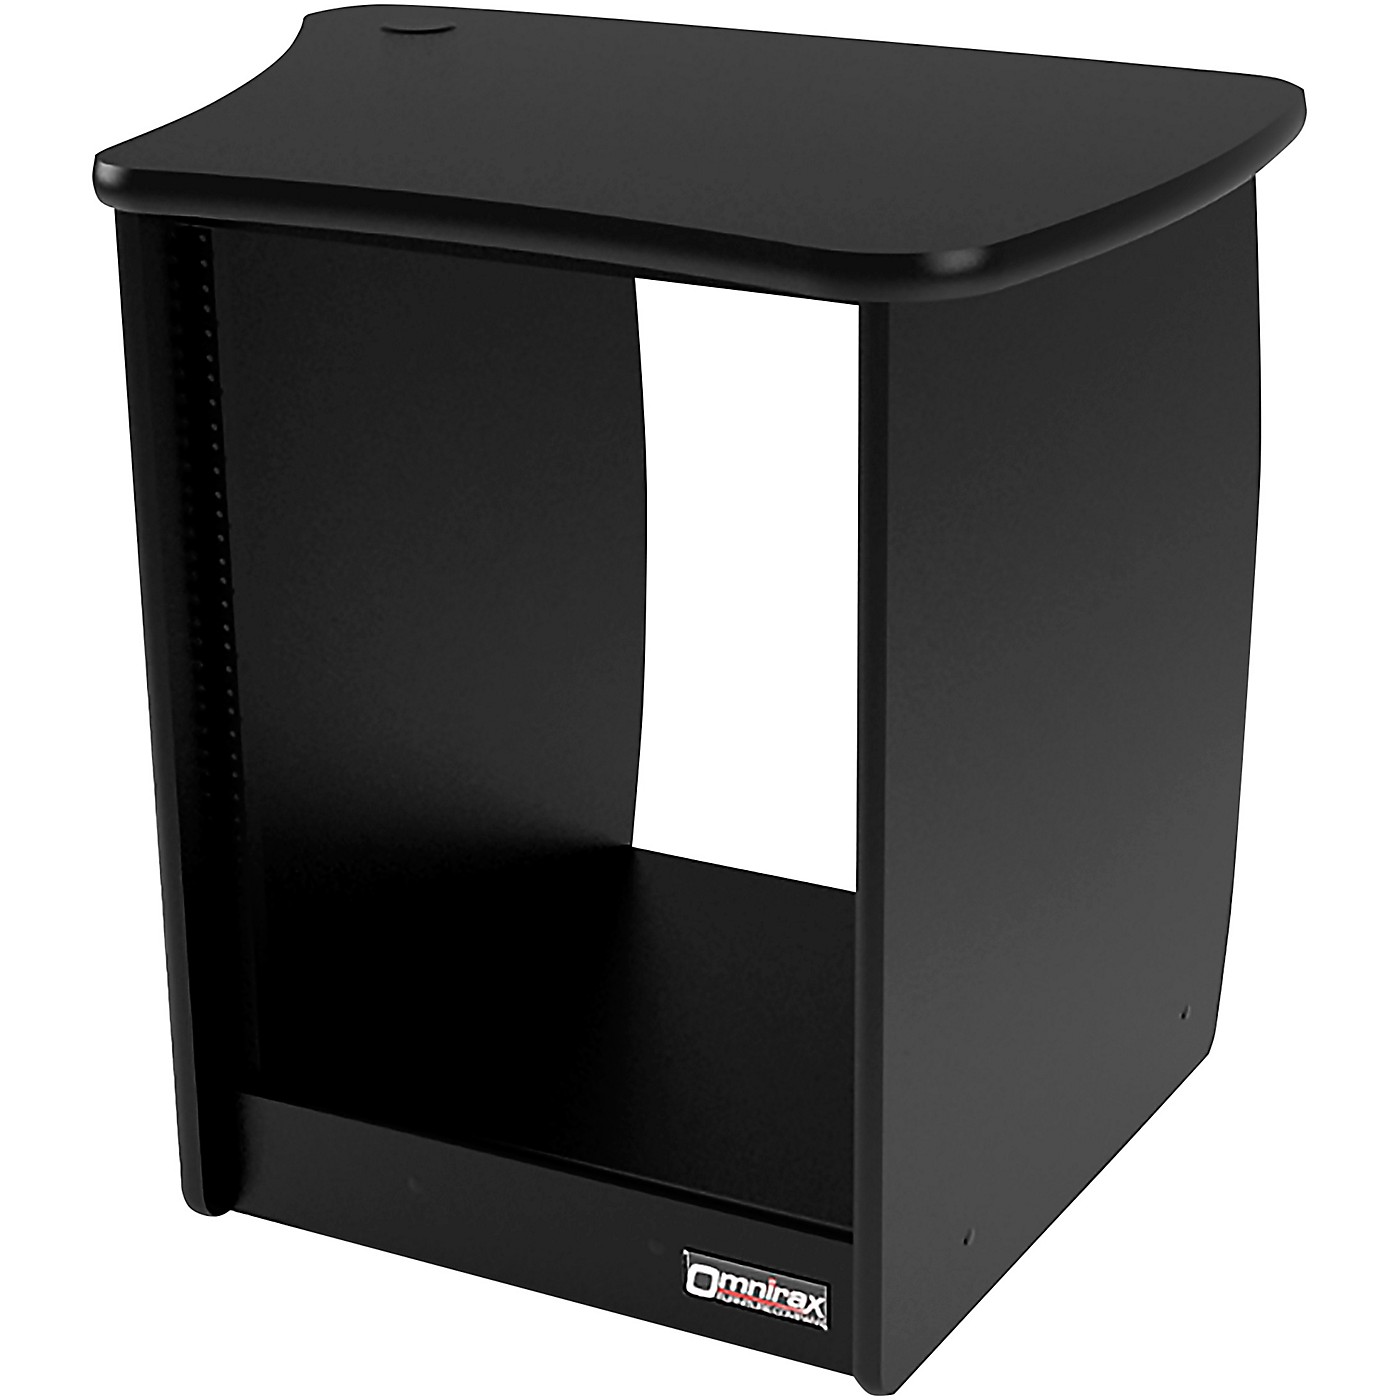 Omnirax 13-Rack Unit Cabinet for the Right Side of the OmniDesk - Black thumbnail